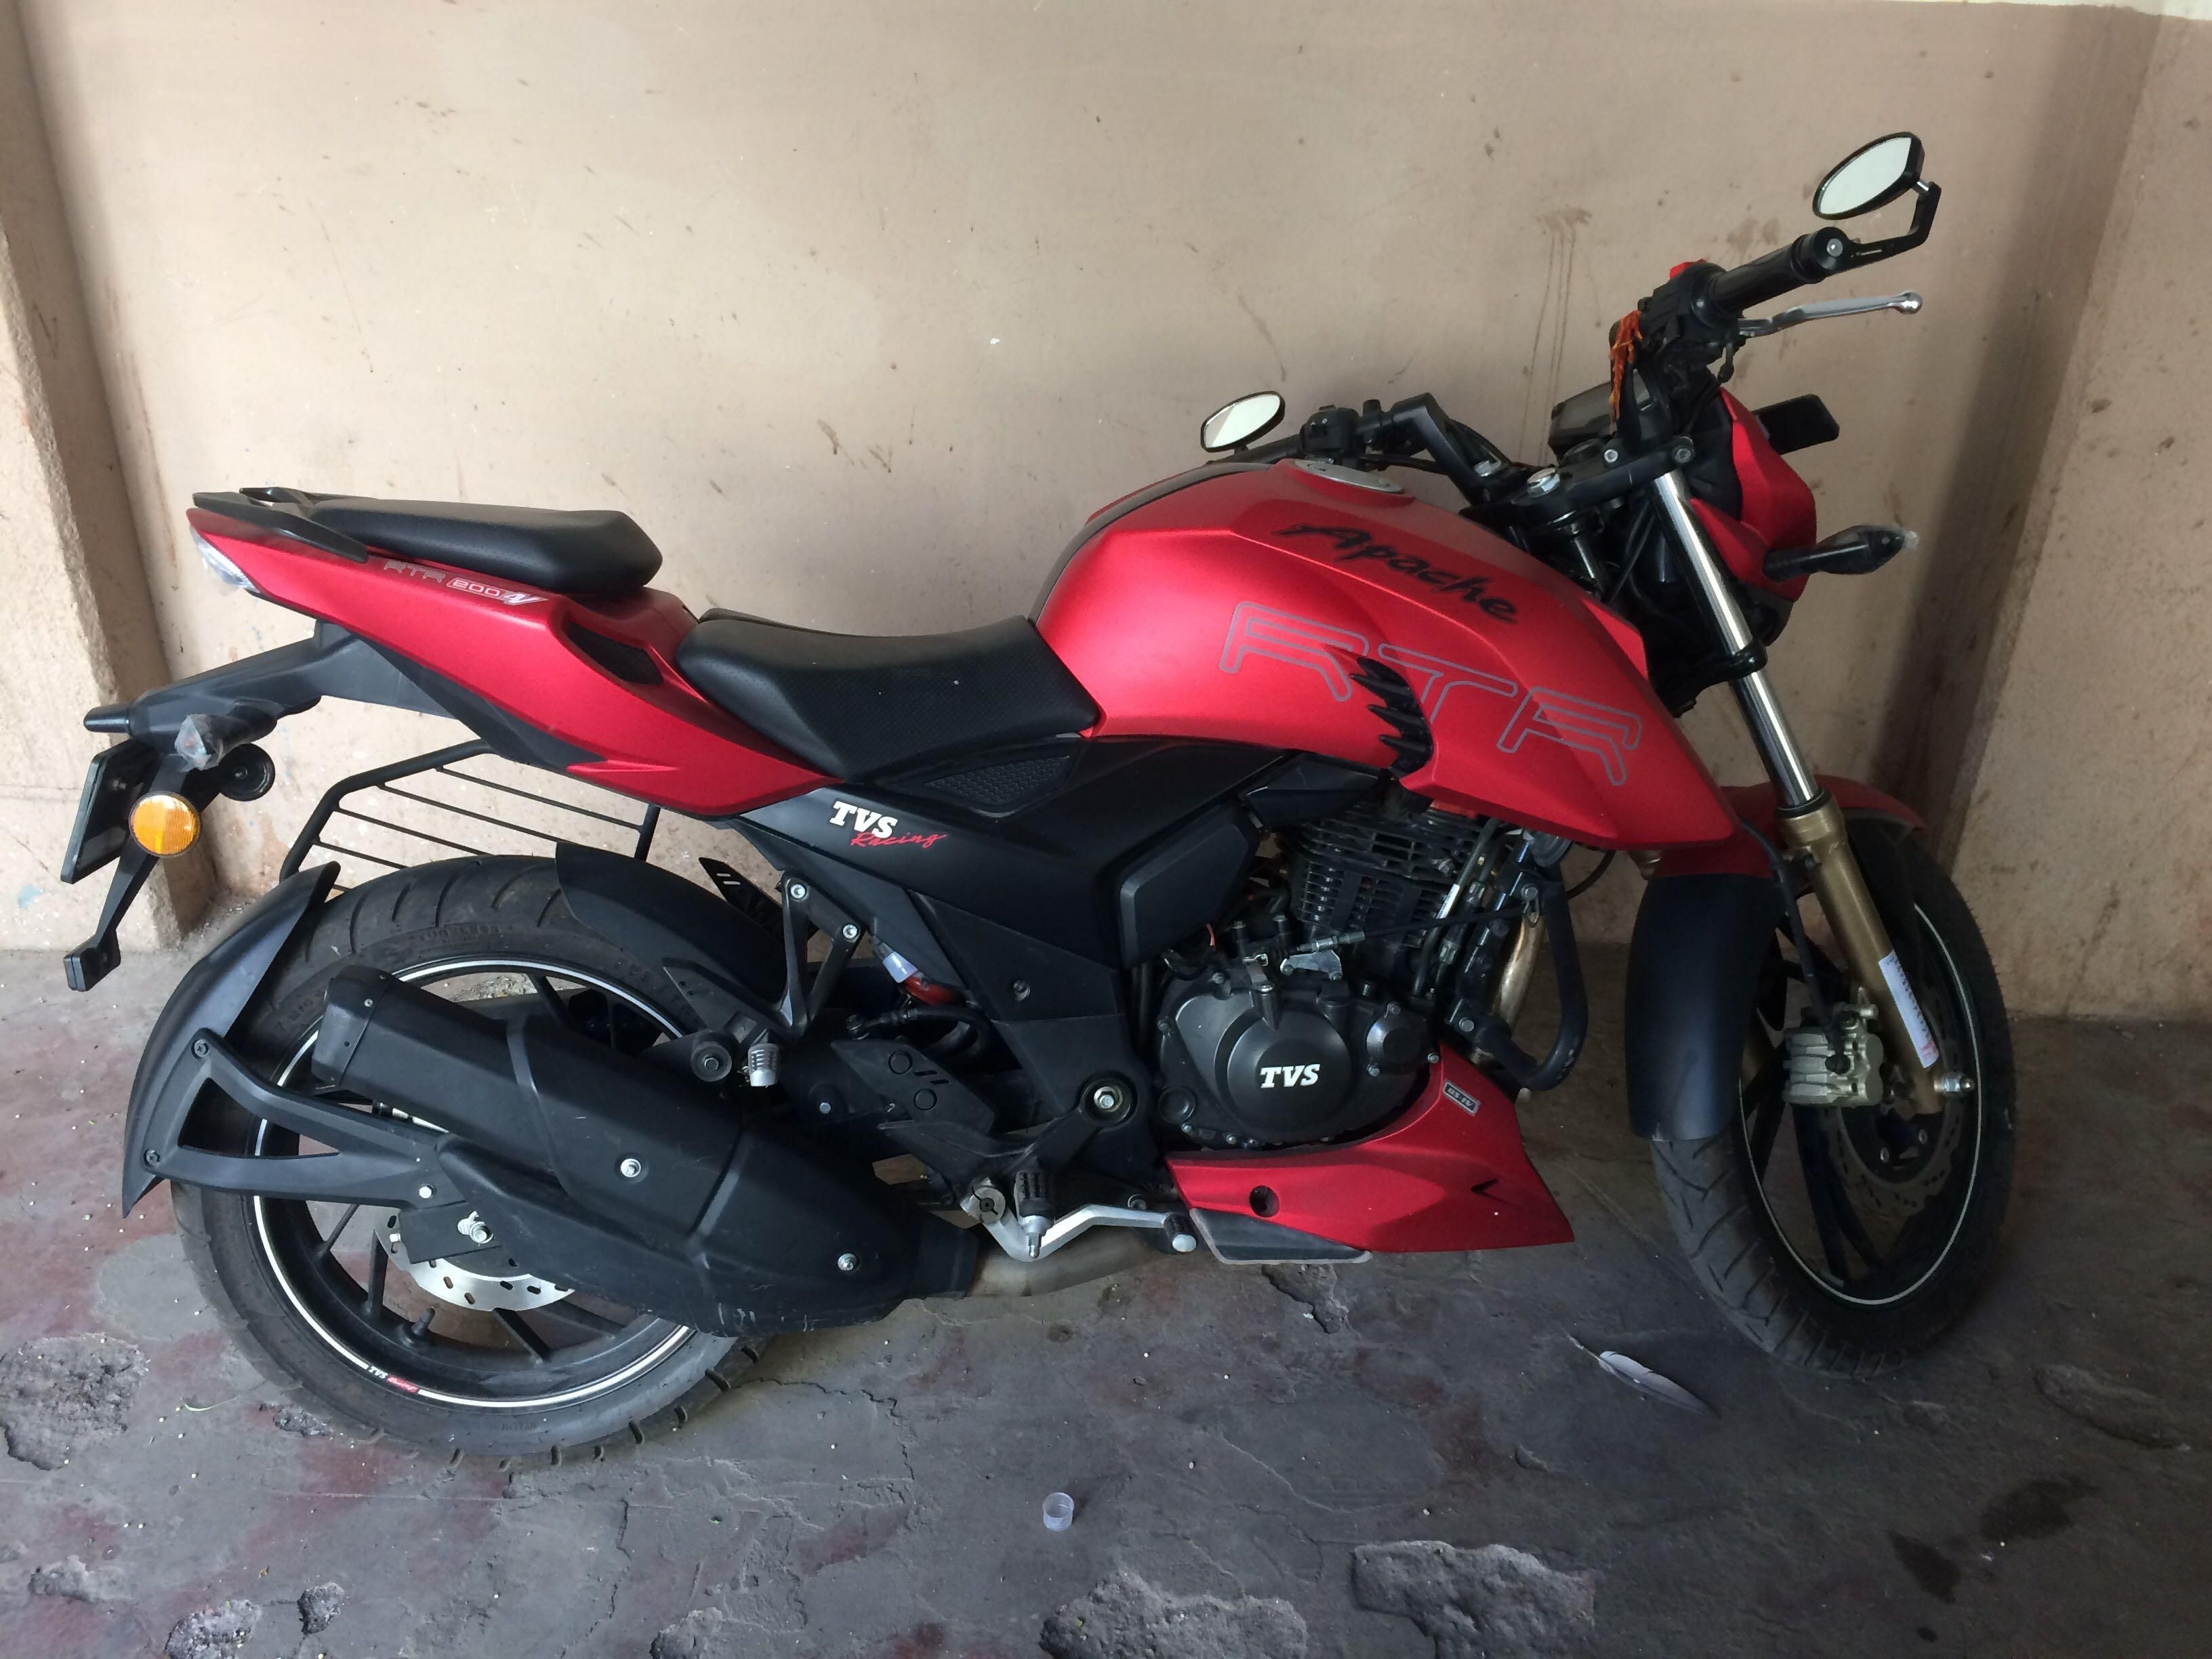 Tvs Apache Rtr Bike For Sale In Indore Id 1415974728 Droom